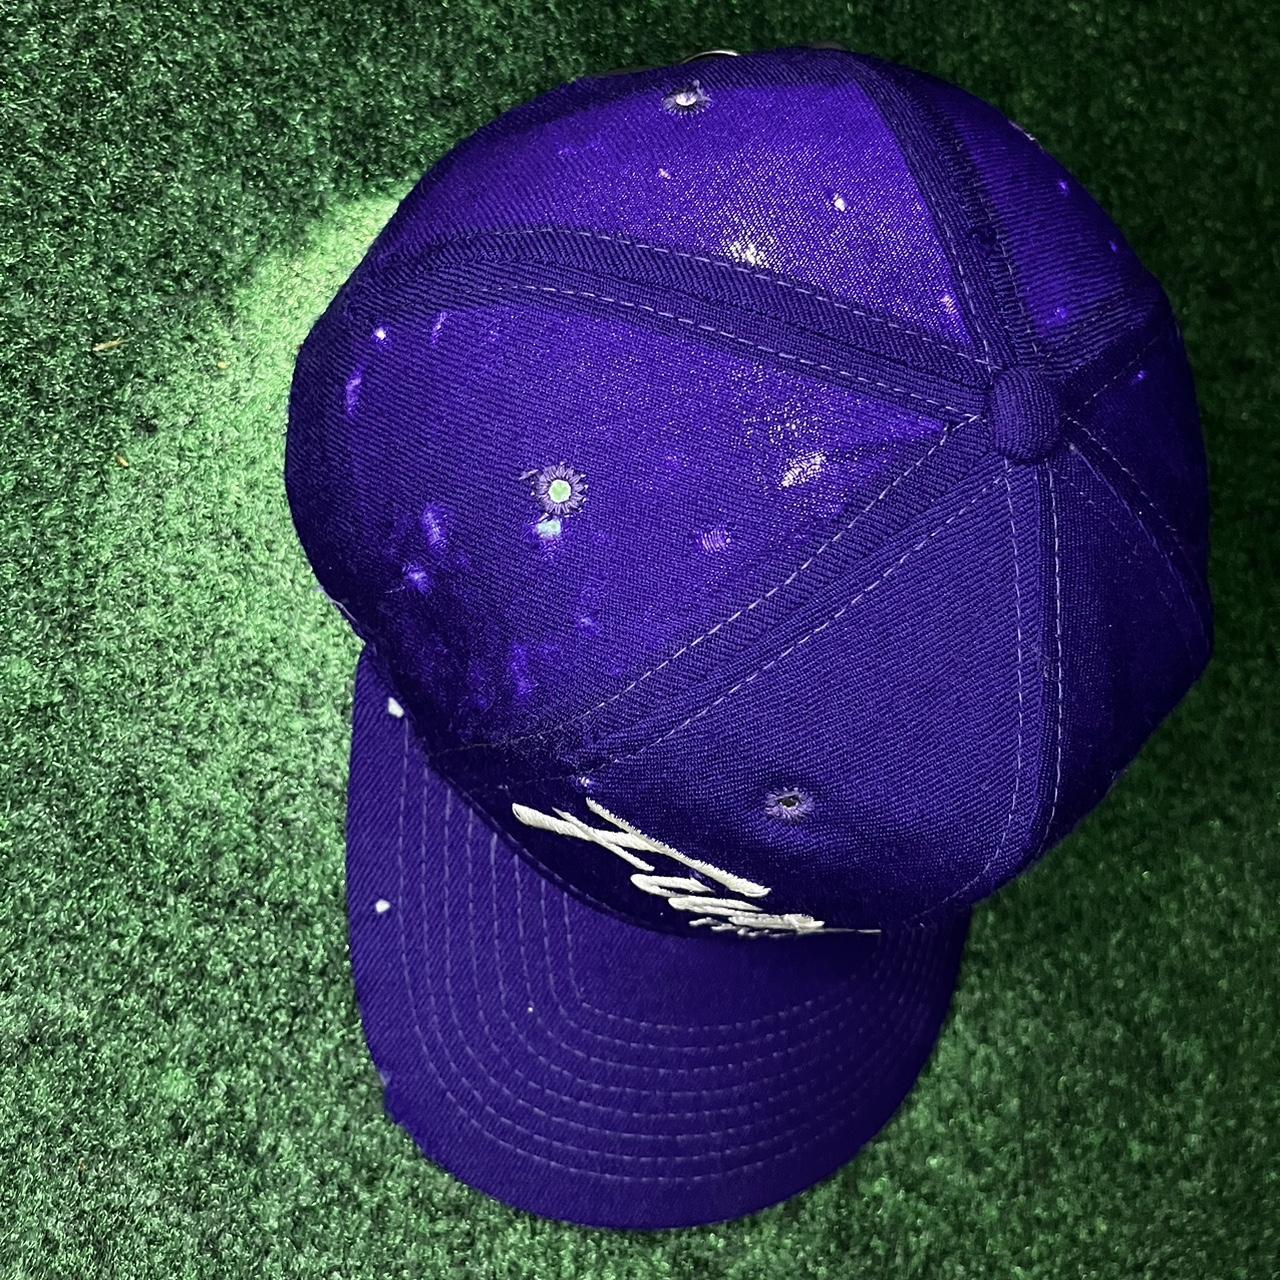 Sports Specialties Men's Purple and White Hat (7)